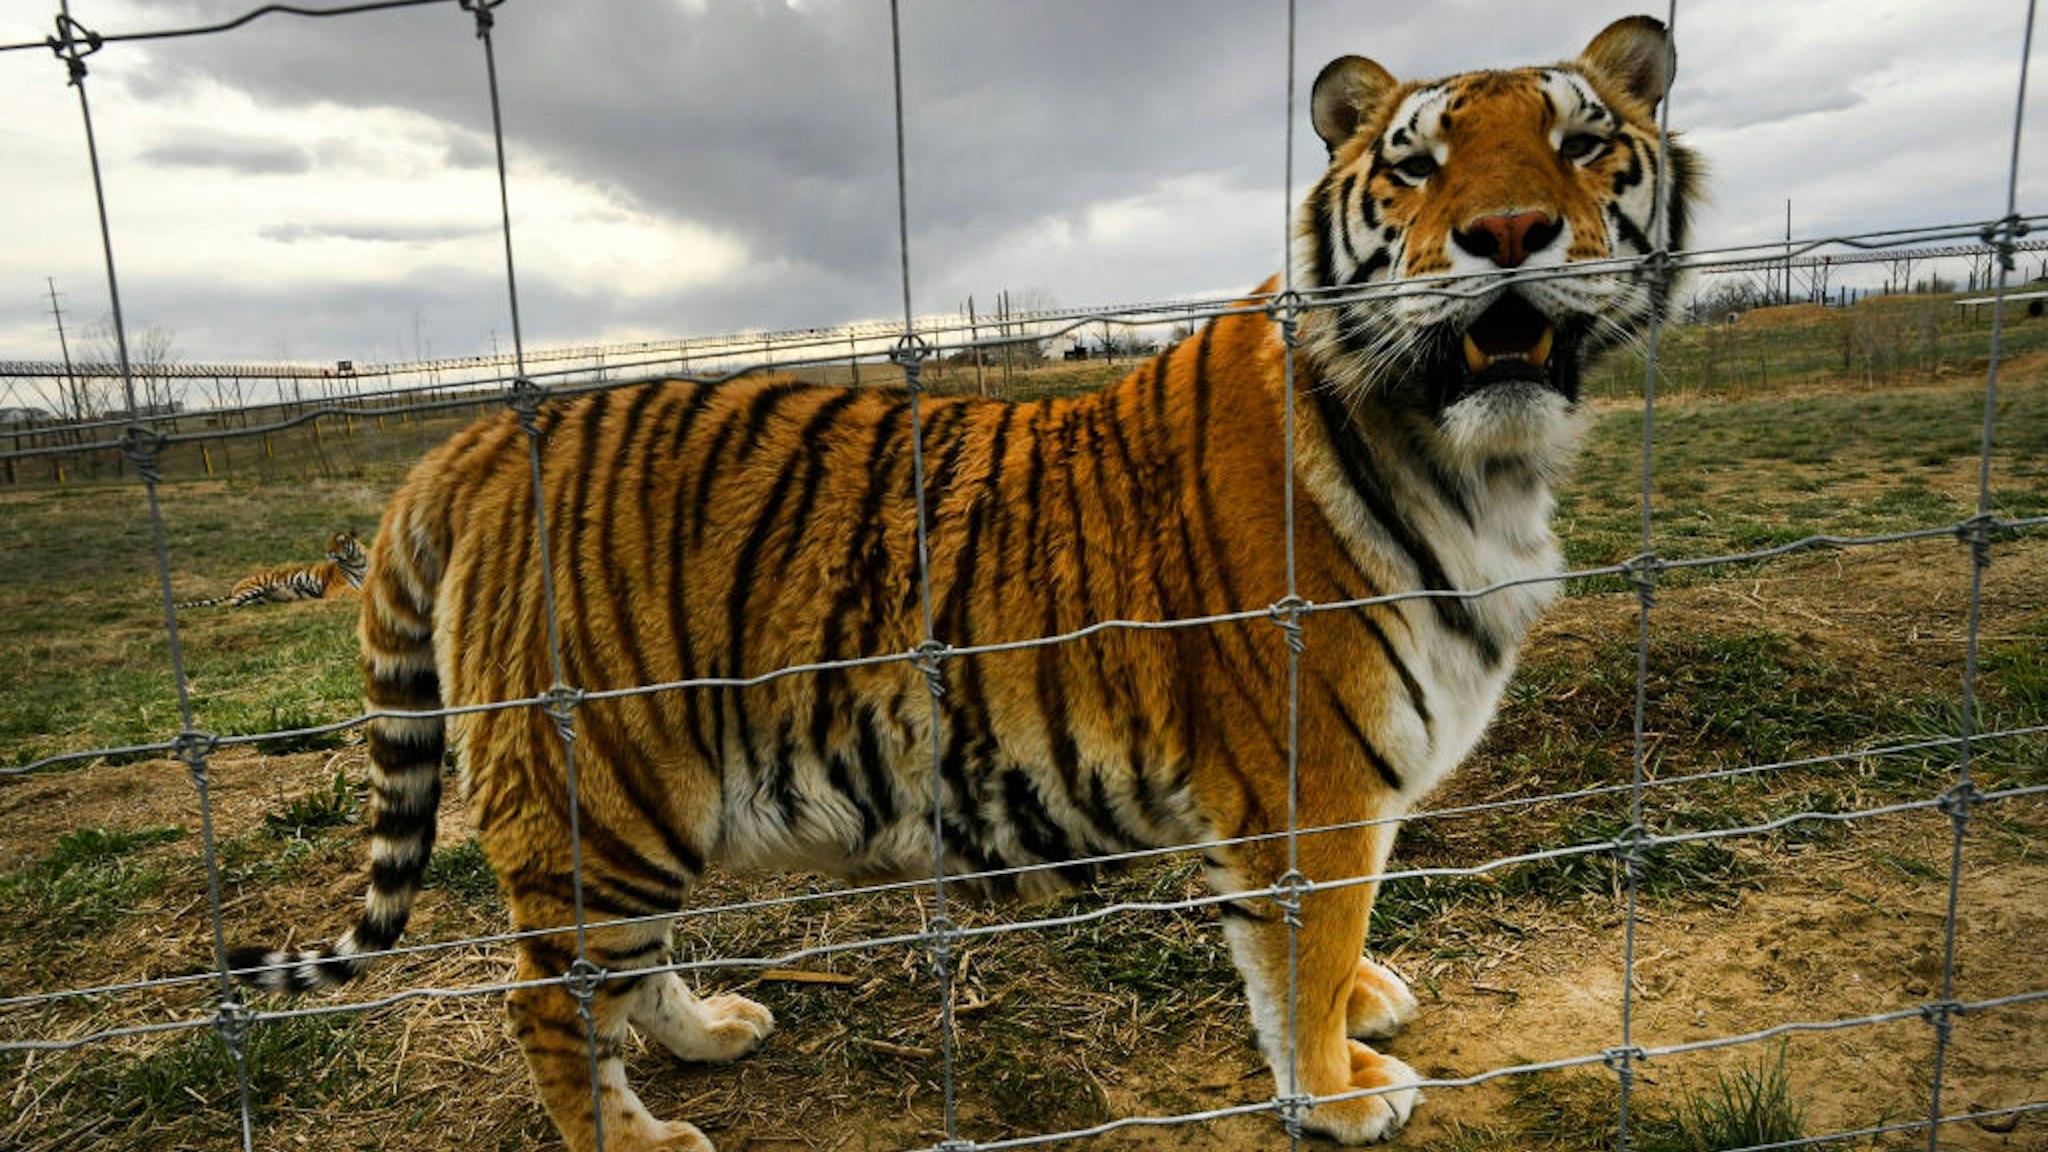 KEENESBURG, COLORADO - APRIL 1: A young tiger relaxes in his open enclosures enjoying a once unimagined life of freedom at the Wild Animal Sanctuary on April 1, 2020 in Kennesburg, Colorado. These tigers are among 45 tigers the sanctuary rescued from Joe Exotic's Greater Wynnewood Animal Park in Florida which is the subject of a recently released miniseries on Netflix called The Tiger King. There are an estimated 70 tigers still living in his animal parks. The sanctuary got 39 of the tigers in 2017 and just brought back another six driving 26 hours overnight to get them back to Colorado. The Wild Animal Sanctuary is a 720 acre refuge home to more than 450 lions, tigers, bears, wolves and other rescued carnivores. (Photo by Helen H. Richardson/MediaNews Group/The Denver Post via Getty Images)